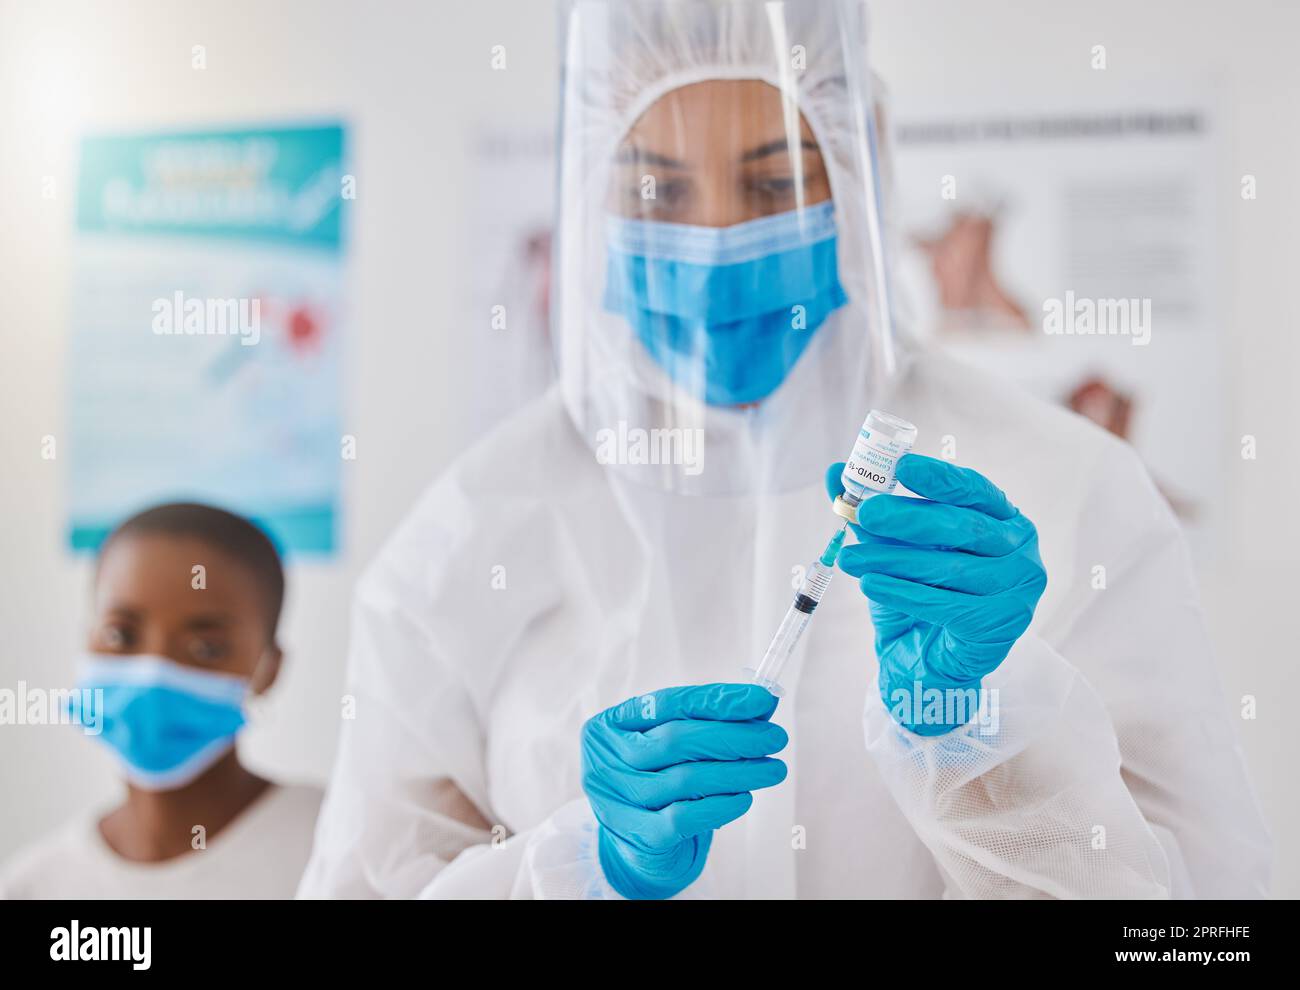 Vaccine, injection and medicine cure for covid, monkeypox and ebola with doctor, healthcare or medical professional. Frontline worker in hazmat suit getting ready to inject clinic or hospital patient Stock Photo